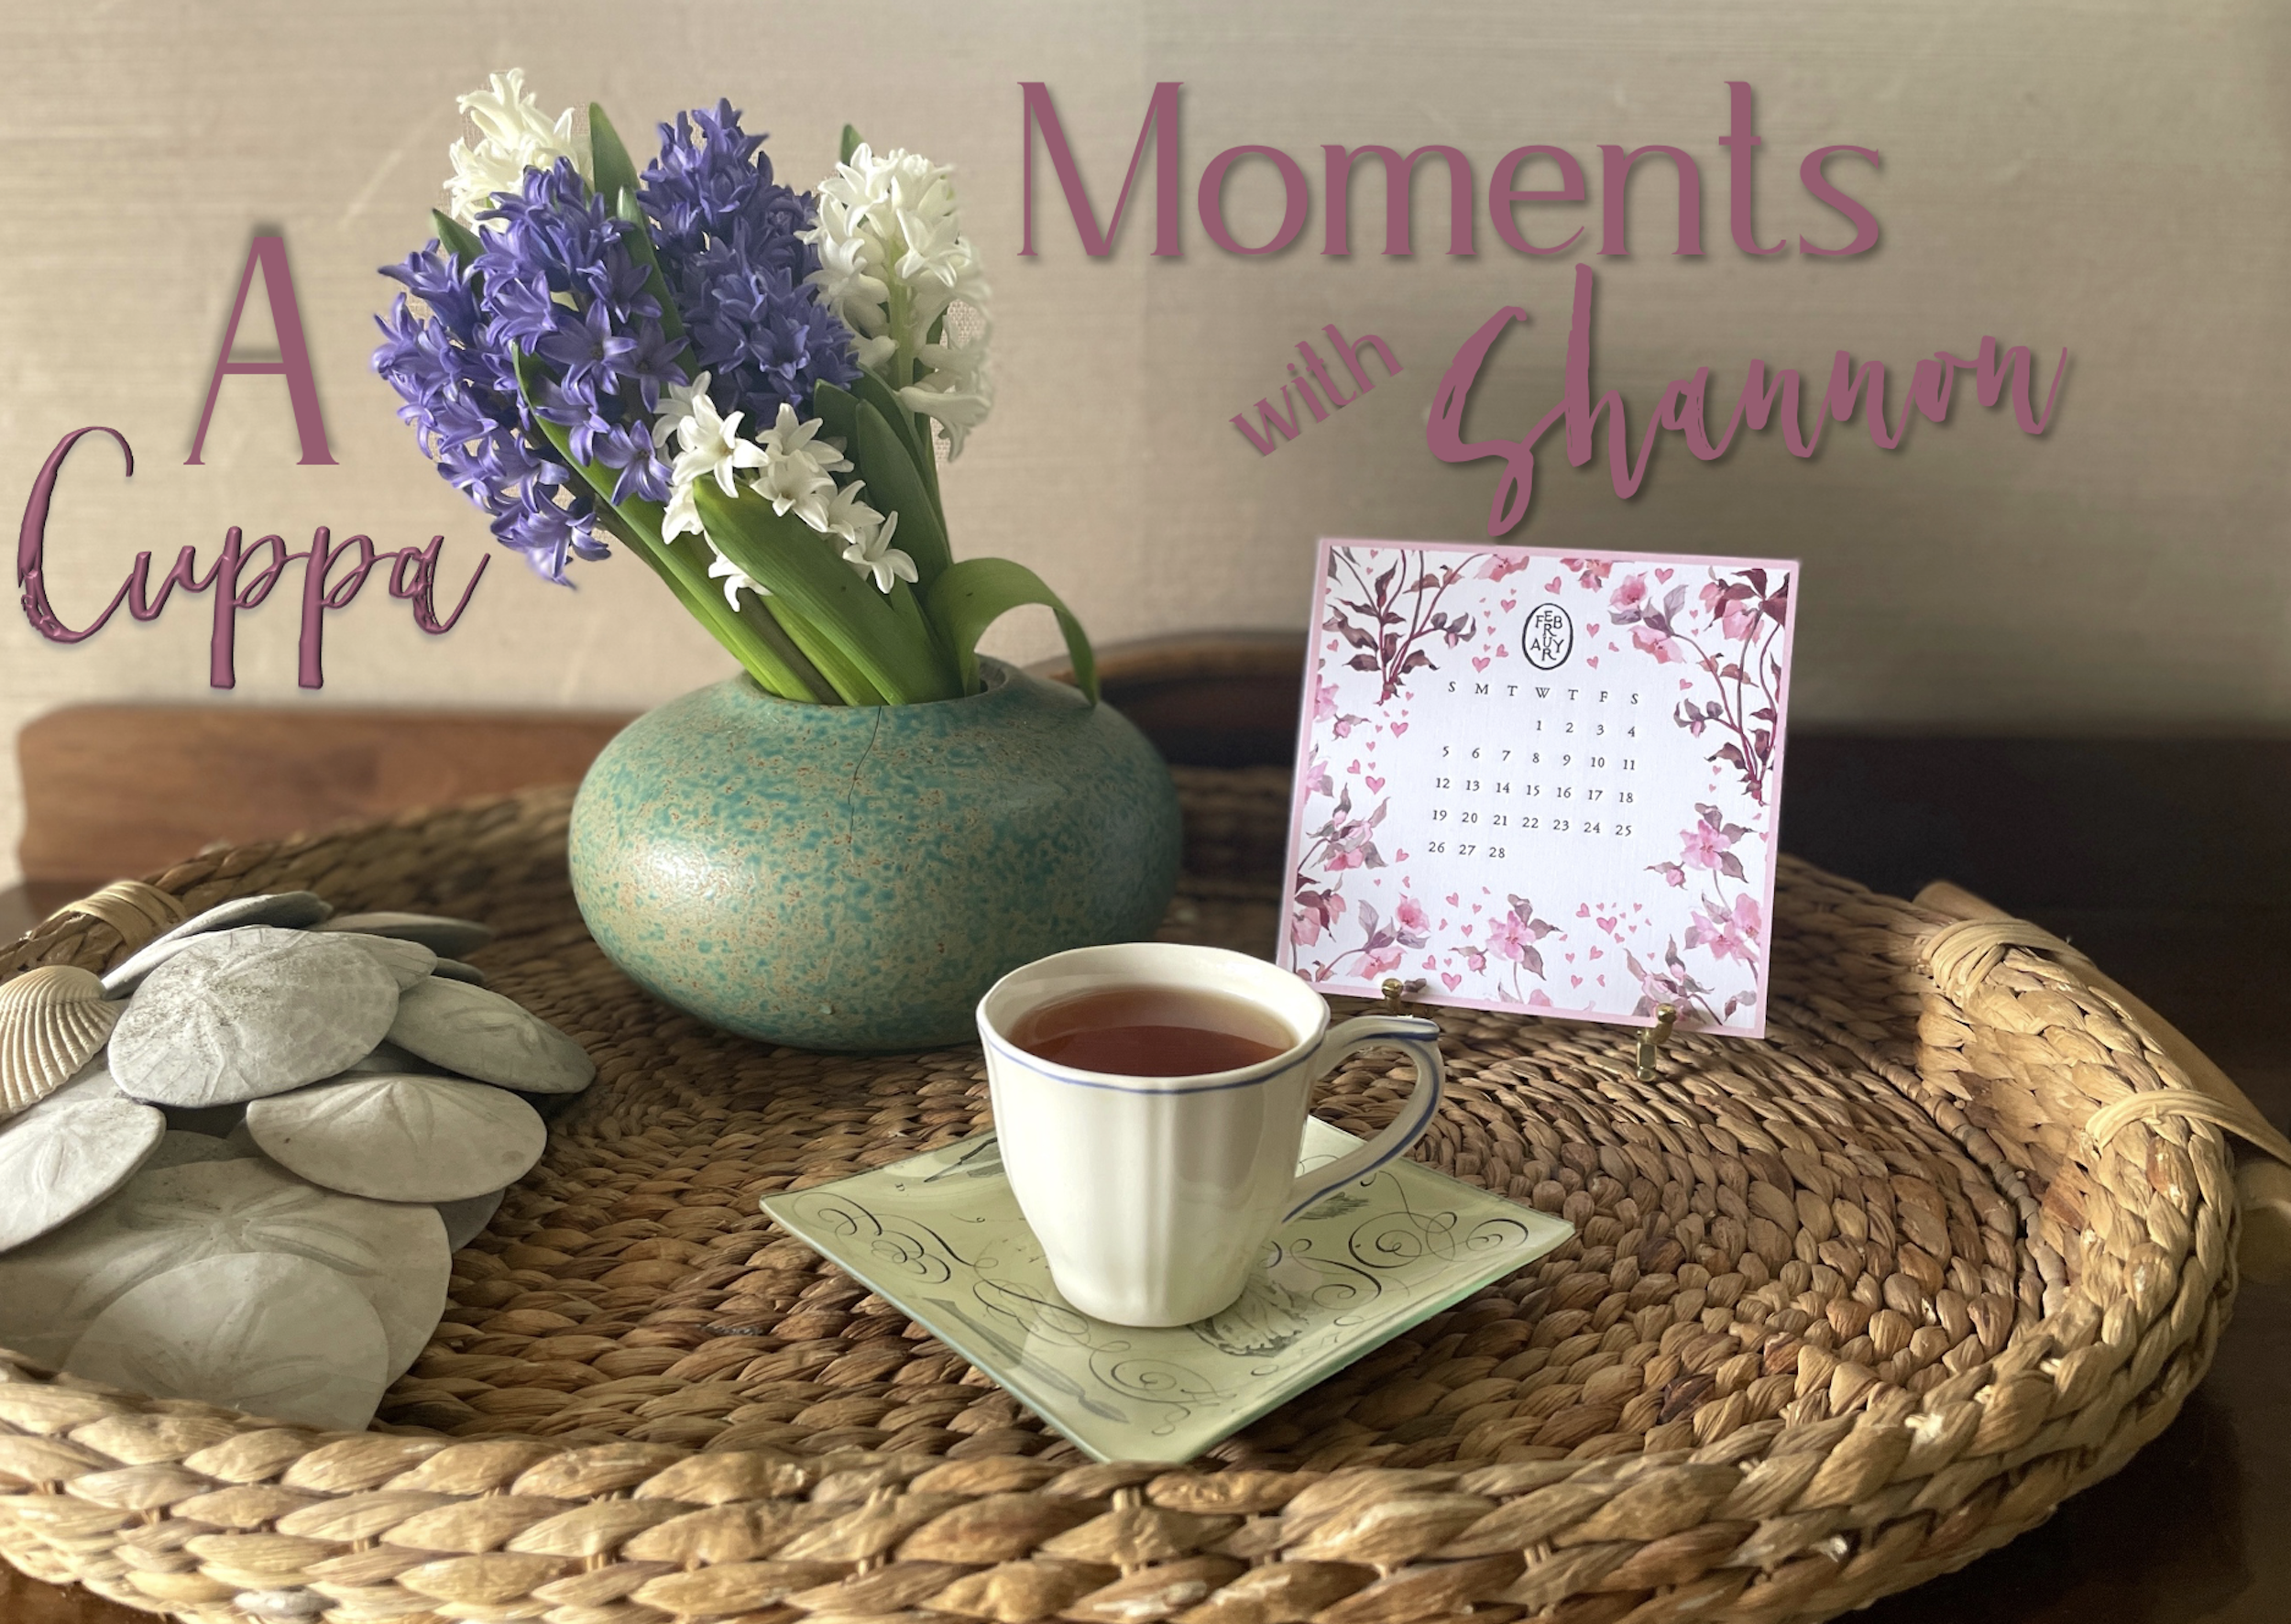 A Cuppa Moments w/Shannon, February 2023